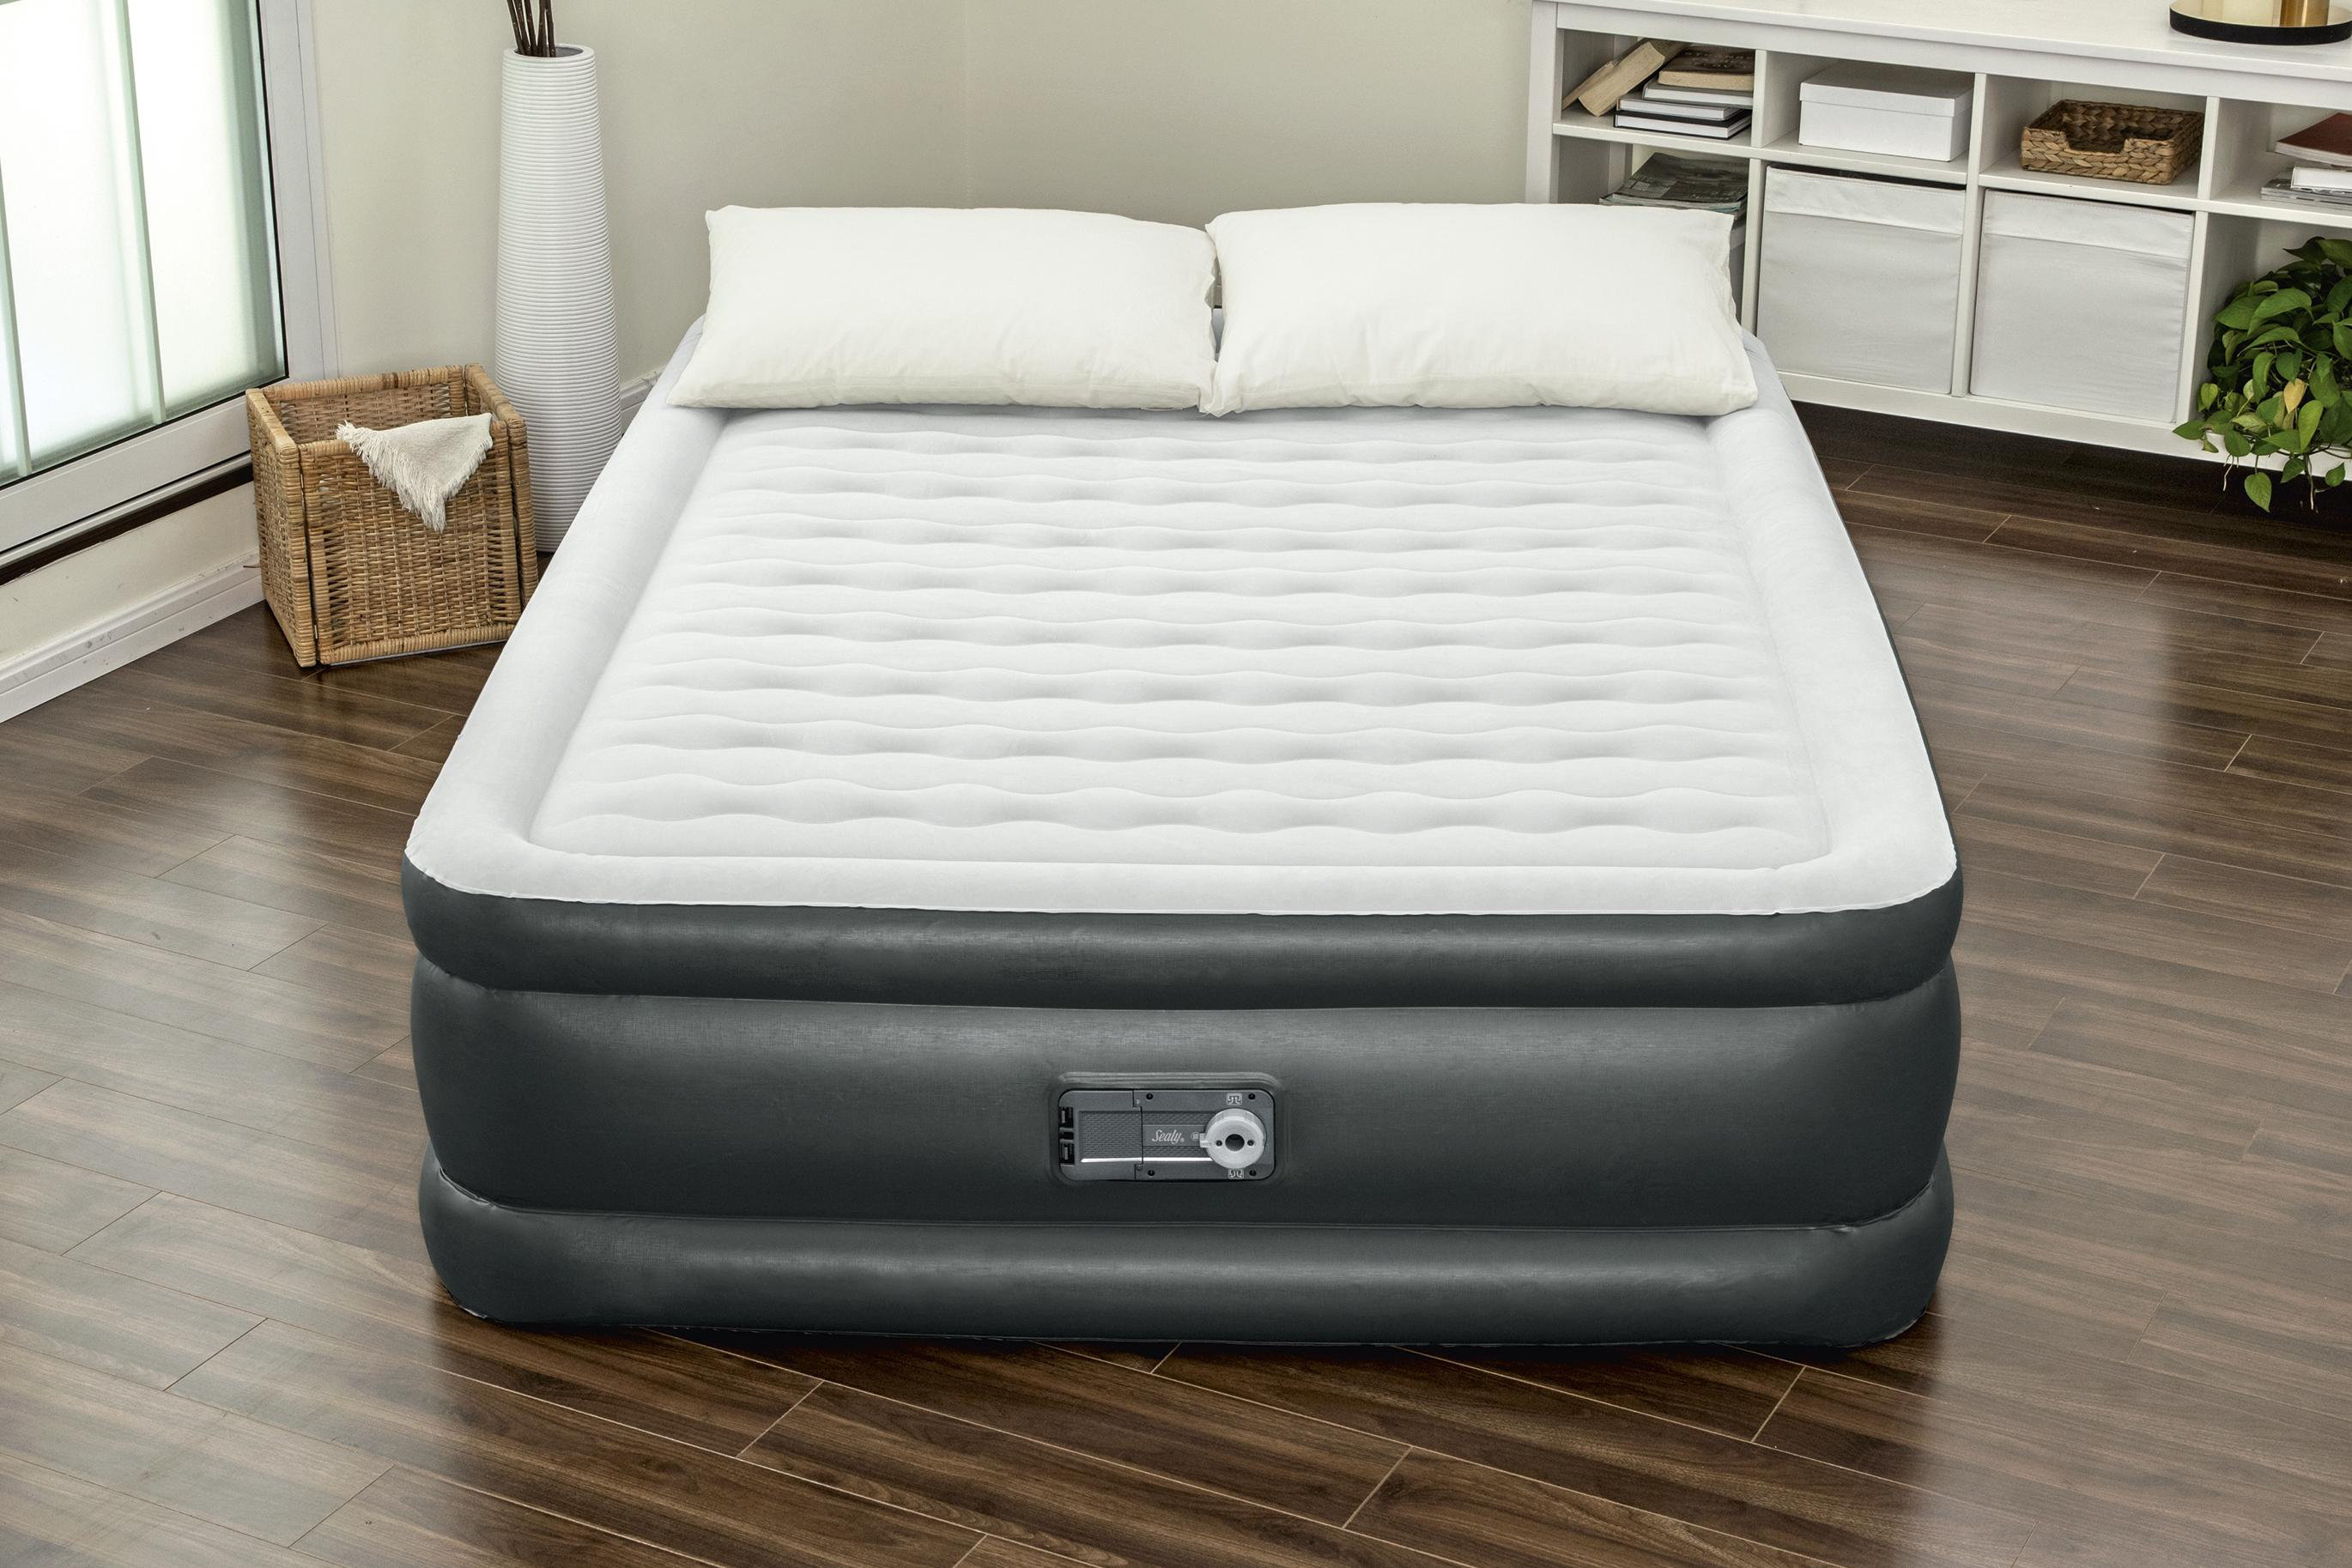 Bestway Sealy Tritech Inflatable Air Mattress Bed Queen 18 with Built-In  AC Pump & Bag & Reviews